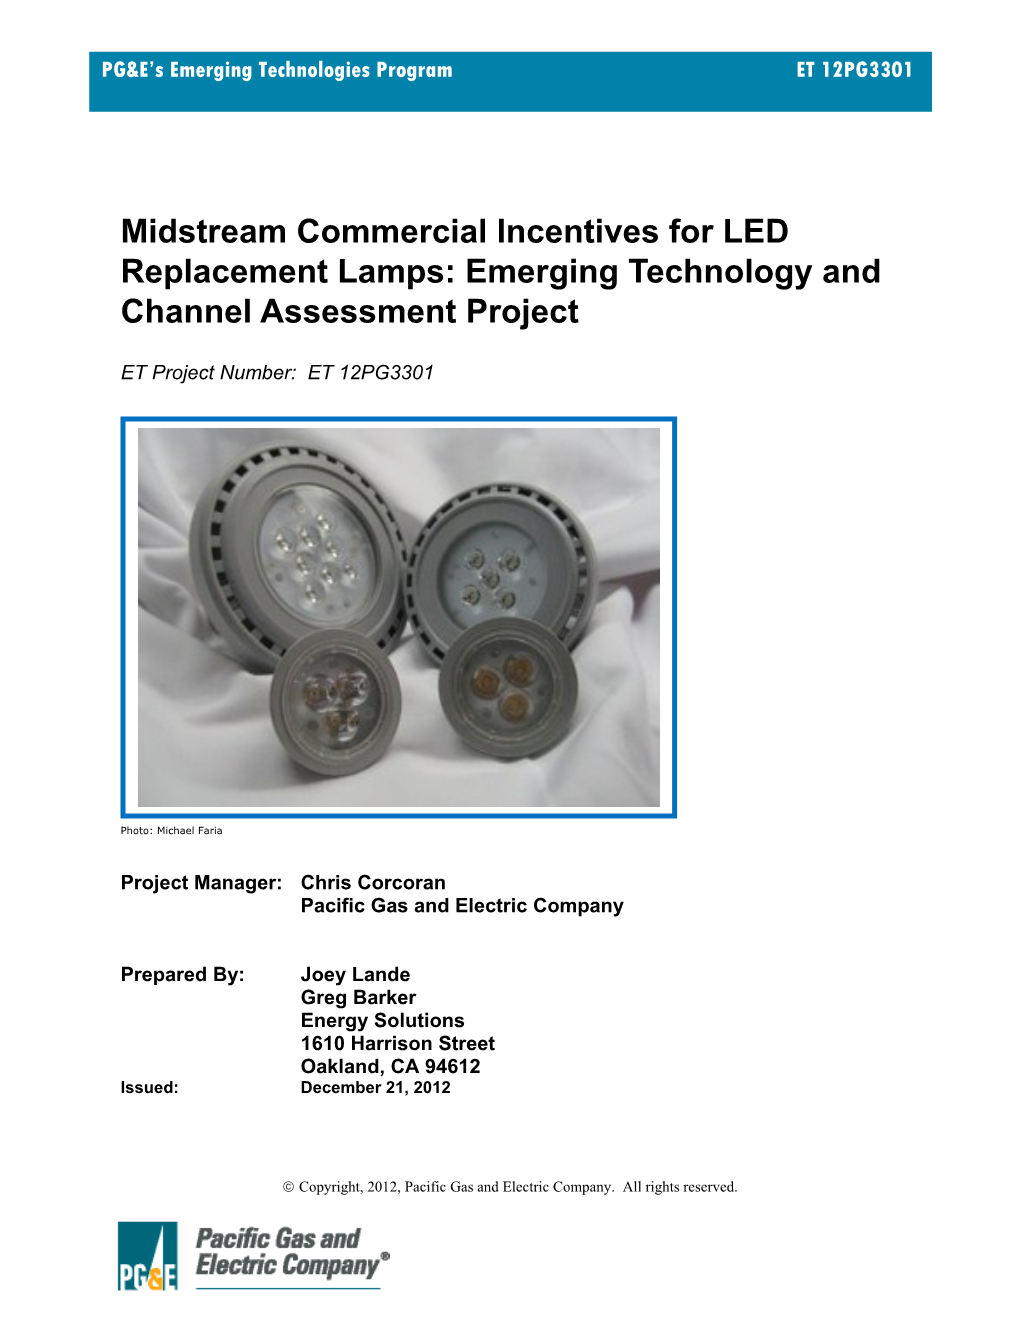 Midstream Commercial Incentives for LED Replacement Lamps: Emerging Technology and Channel Assessment Project